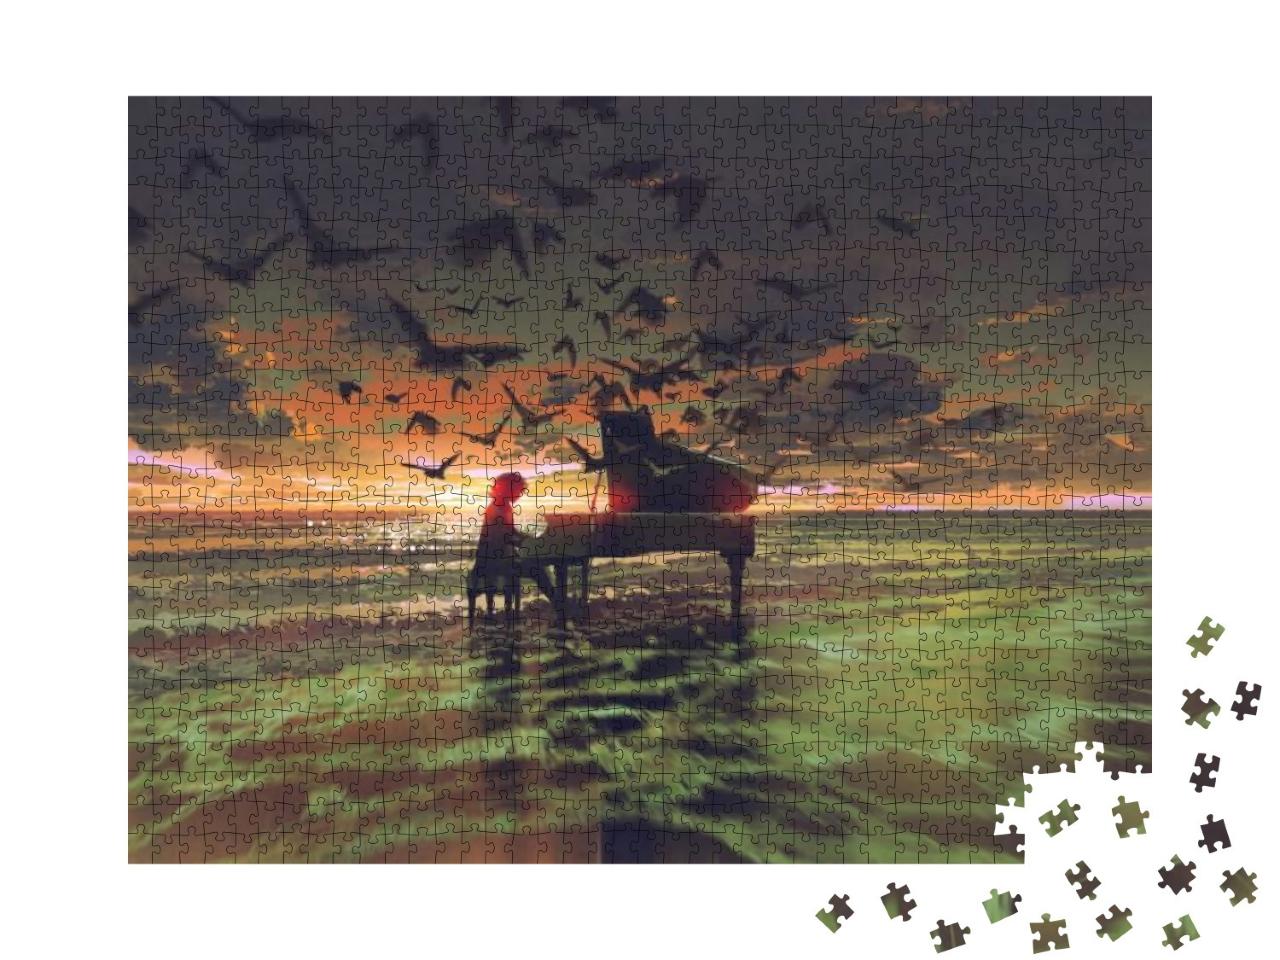 Digital Art of the Man Playing Piano Among Flock of Birds... Jigsaw Puzzle with 1000 pieces